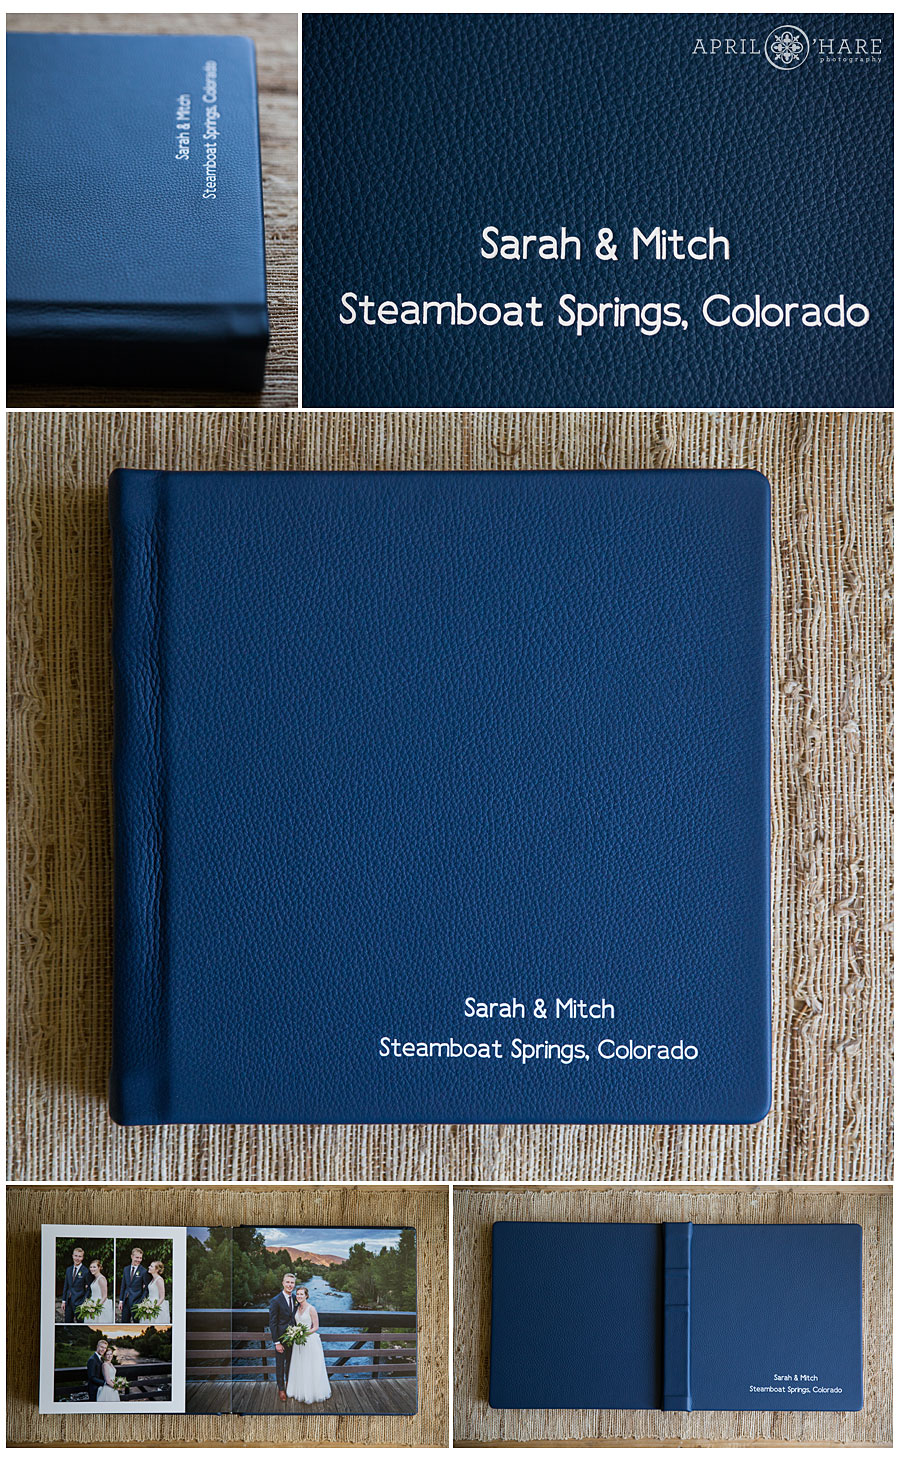 Wedding albums created with imprinting on the cover in a white modern font on blue leather